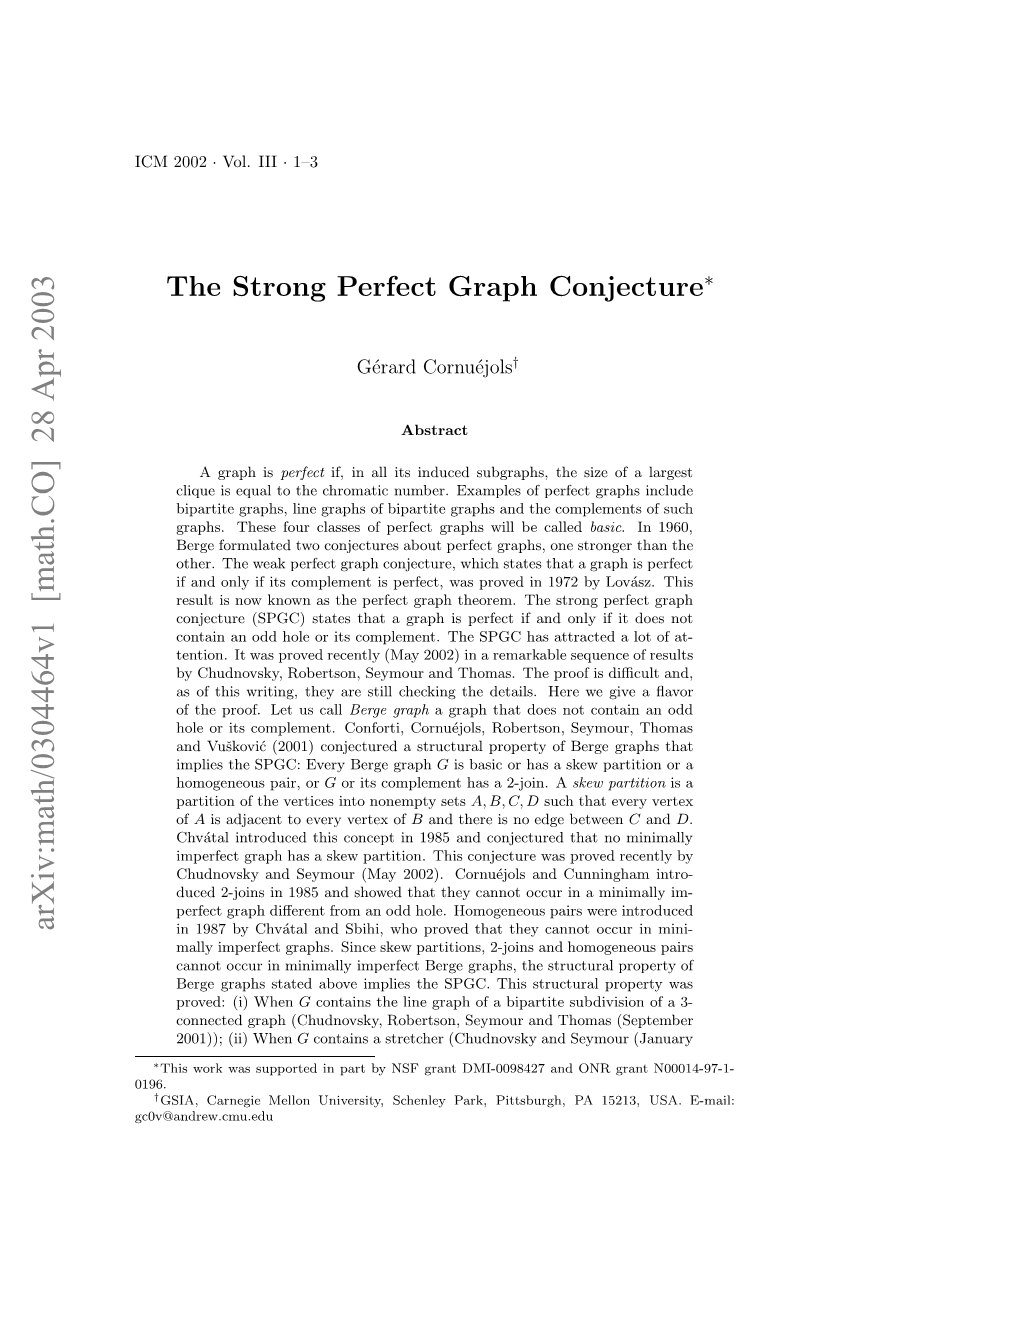 The Strong Perfect Graph Conjecture